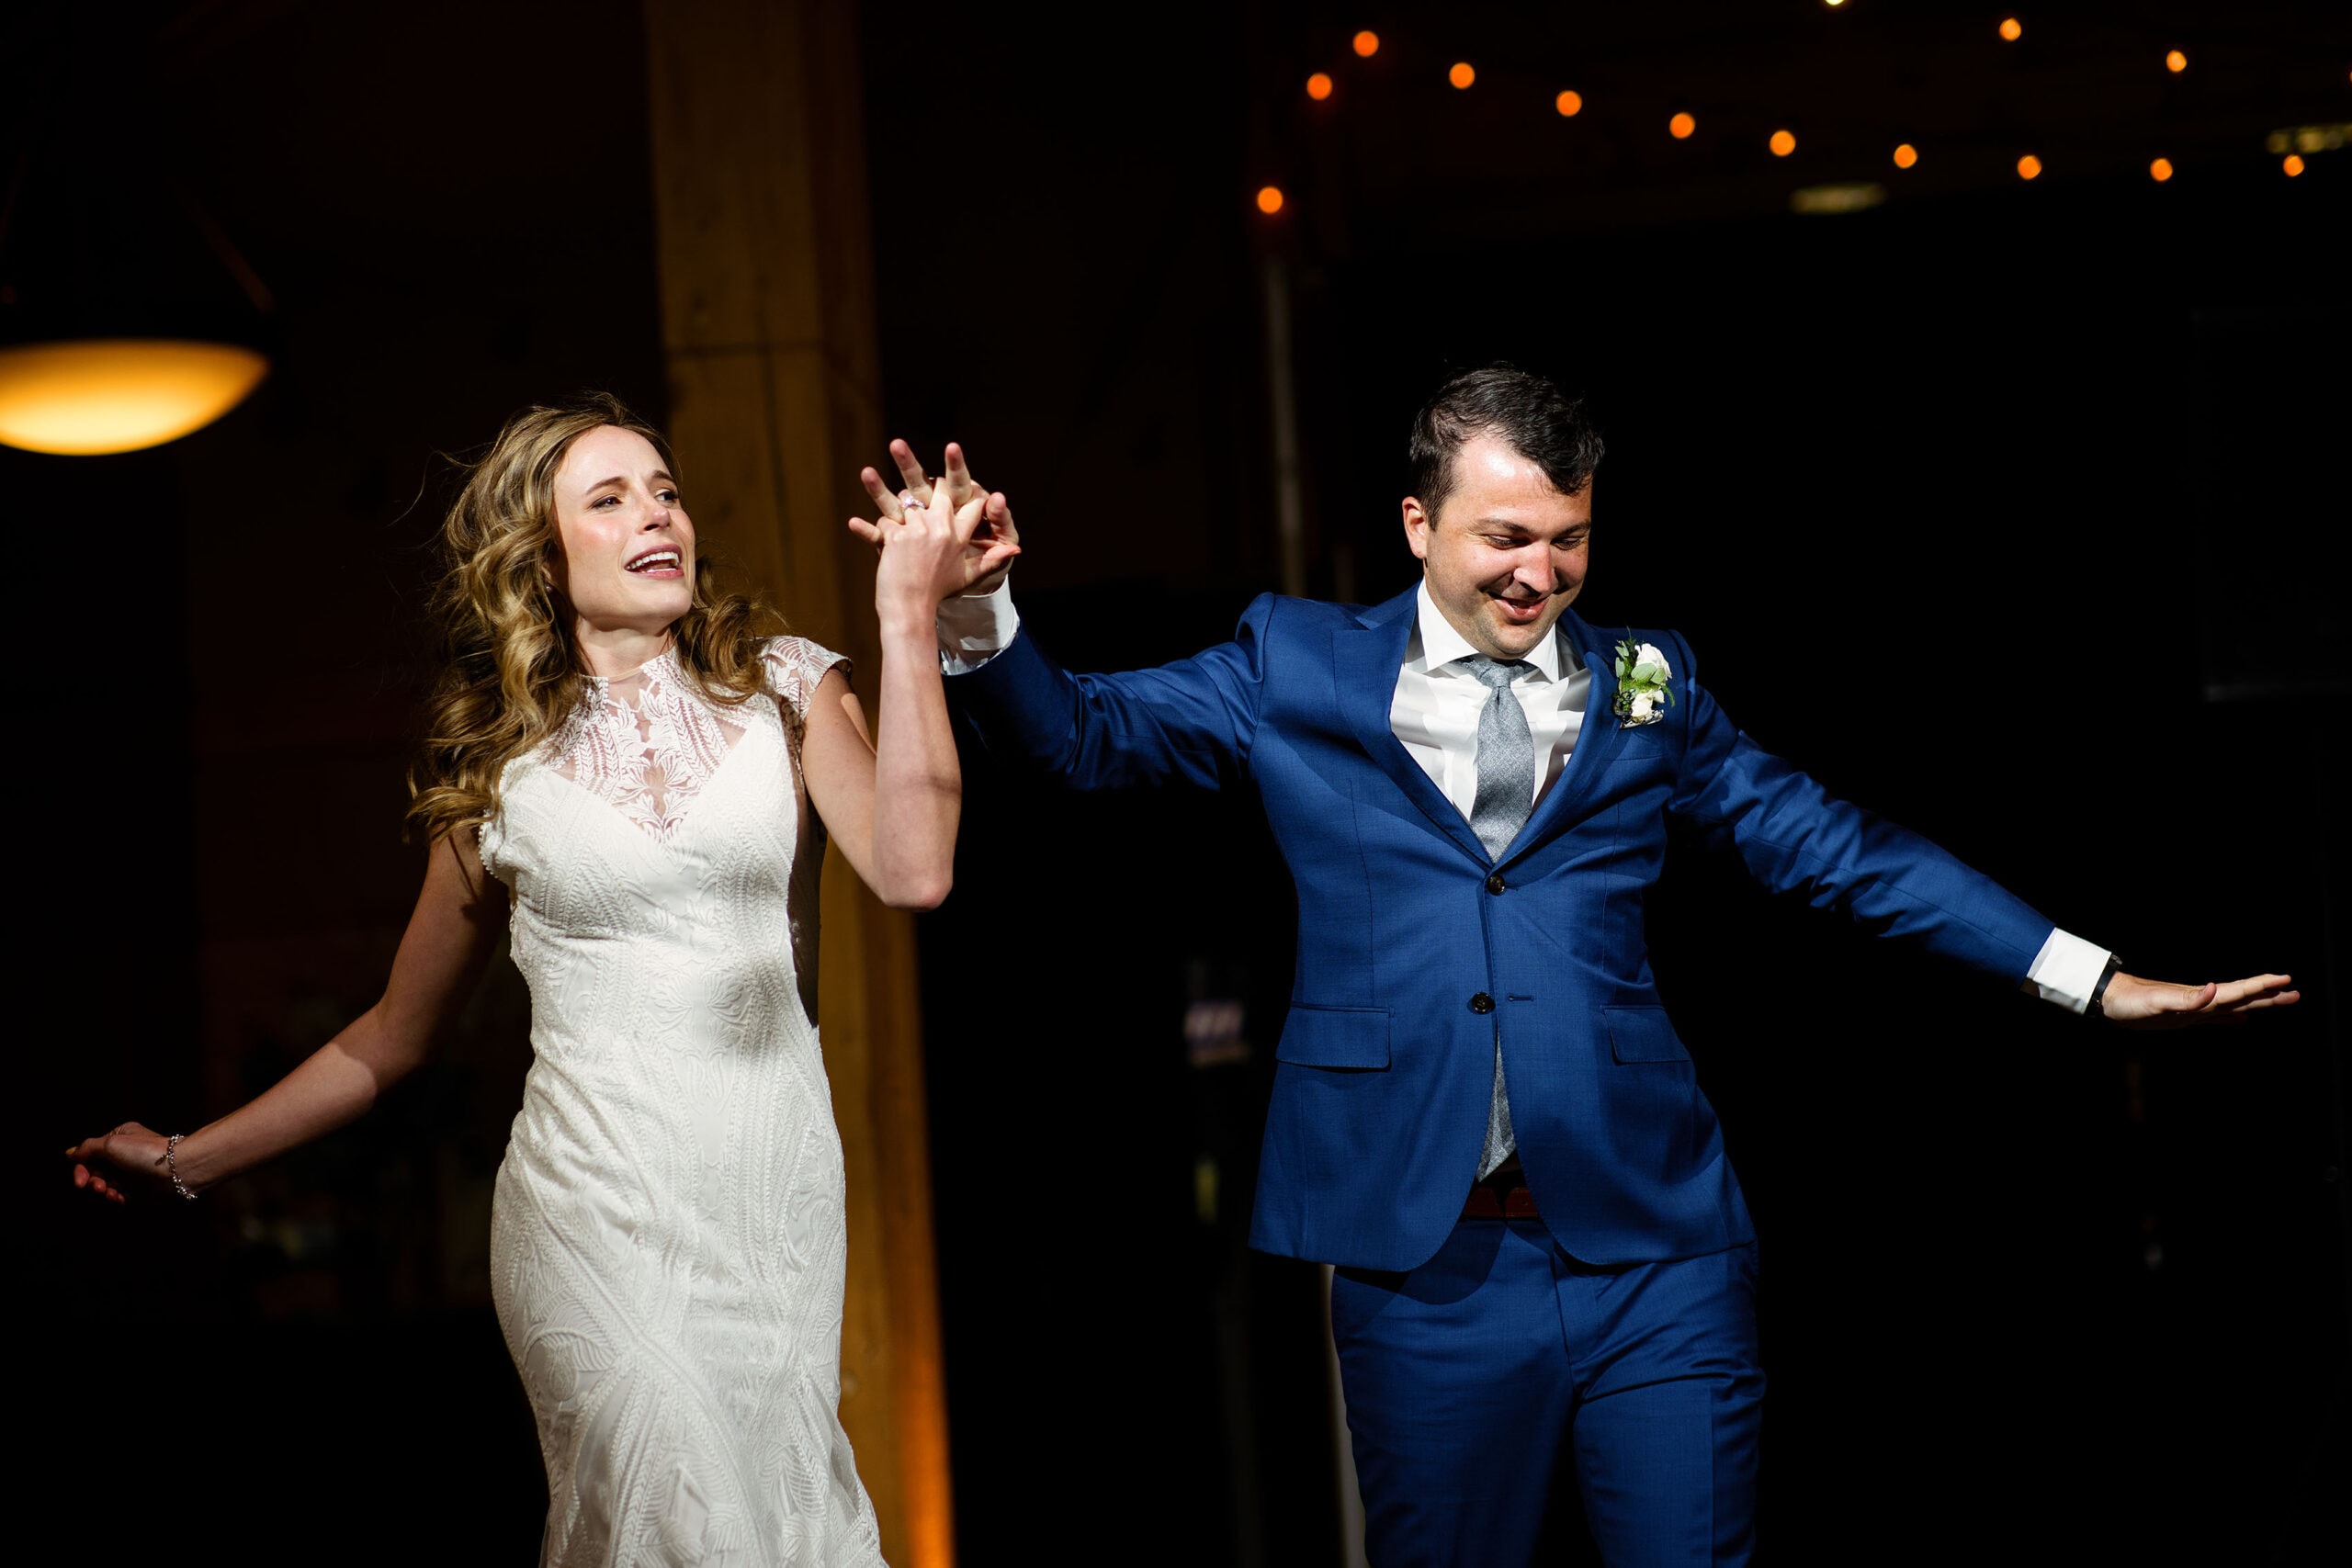 The newlyweds dance while introduced to their reception